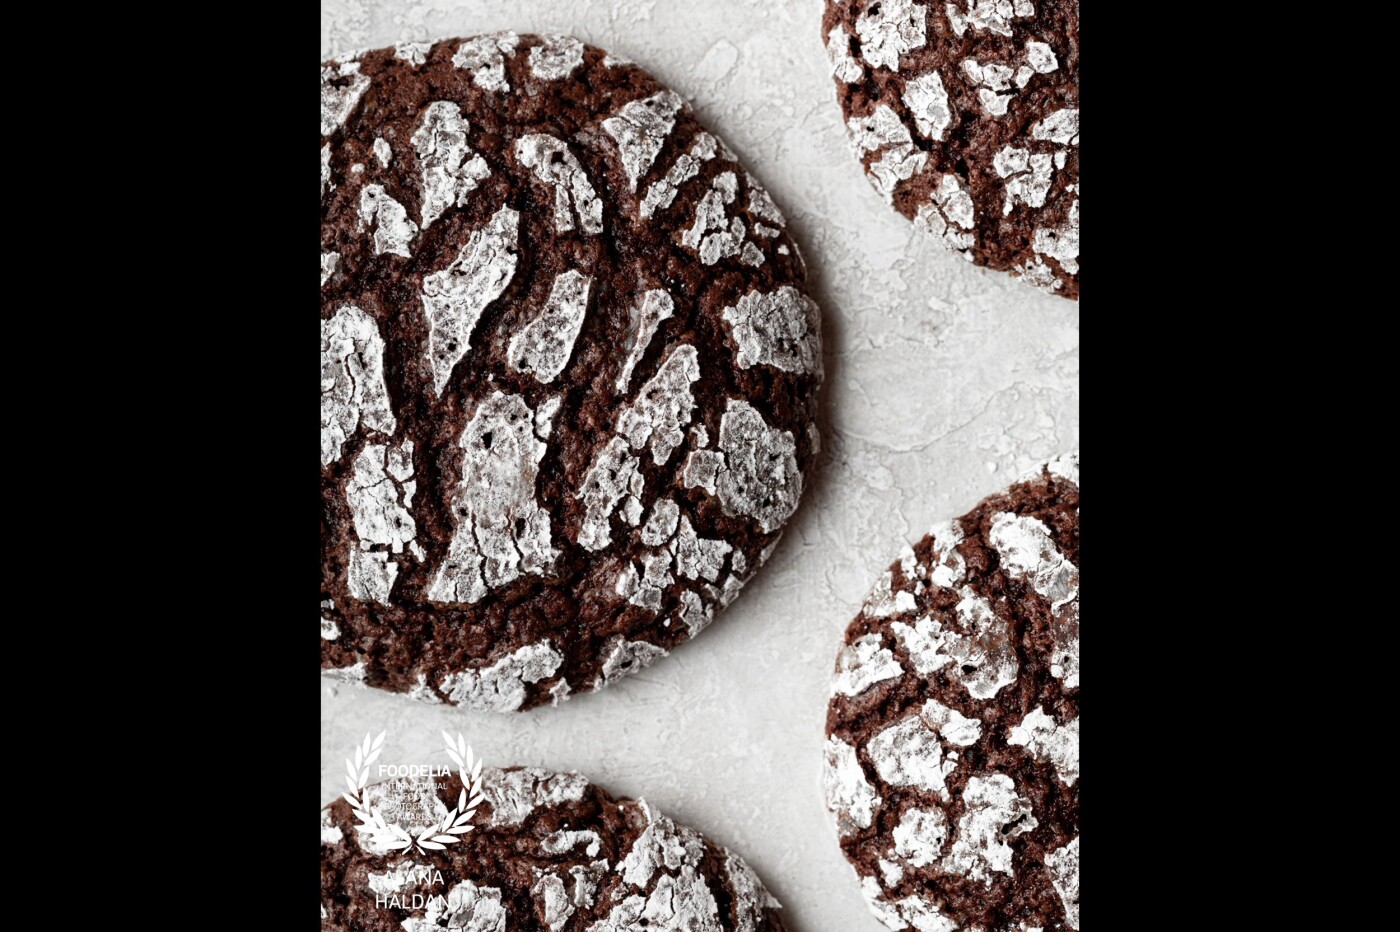 I recently developed this new Chocolate Tahini Crinkle Cookie recipe for my blog, and I decided to use my macro lens to capture the beautiful textural details of the crinkles.